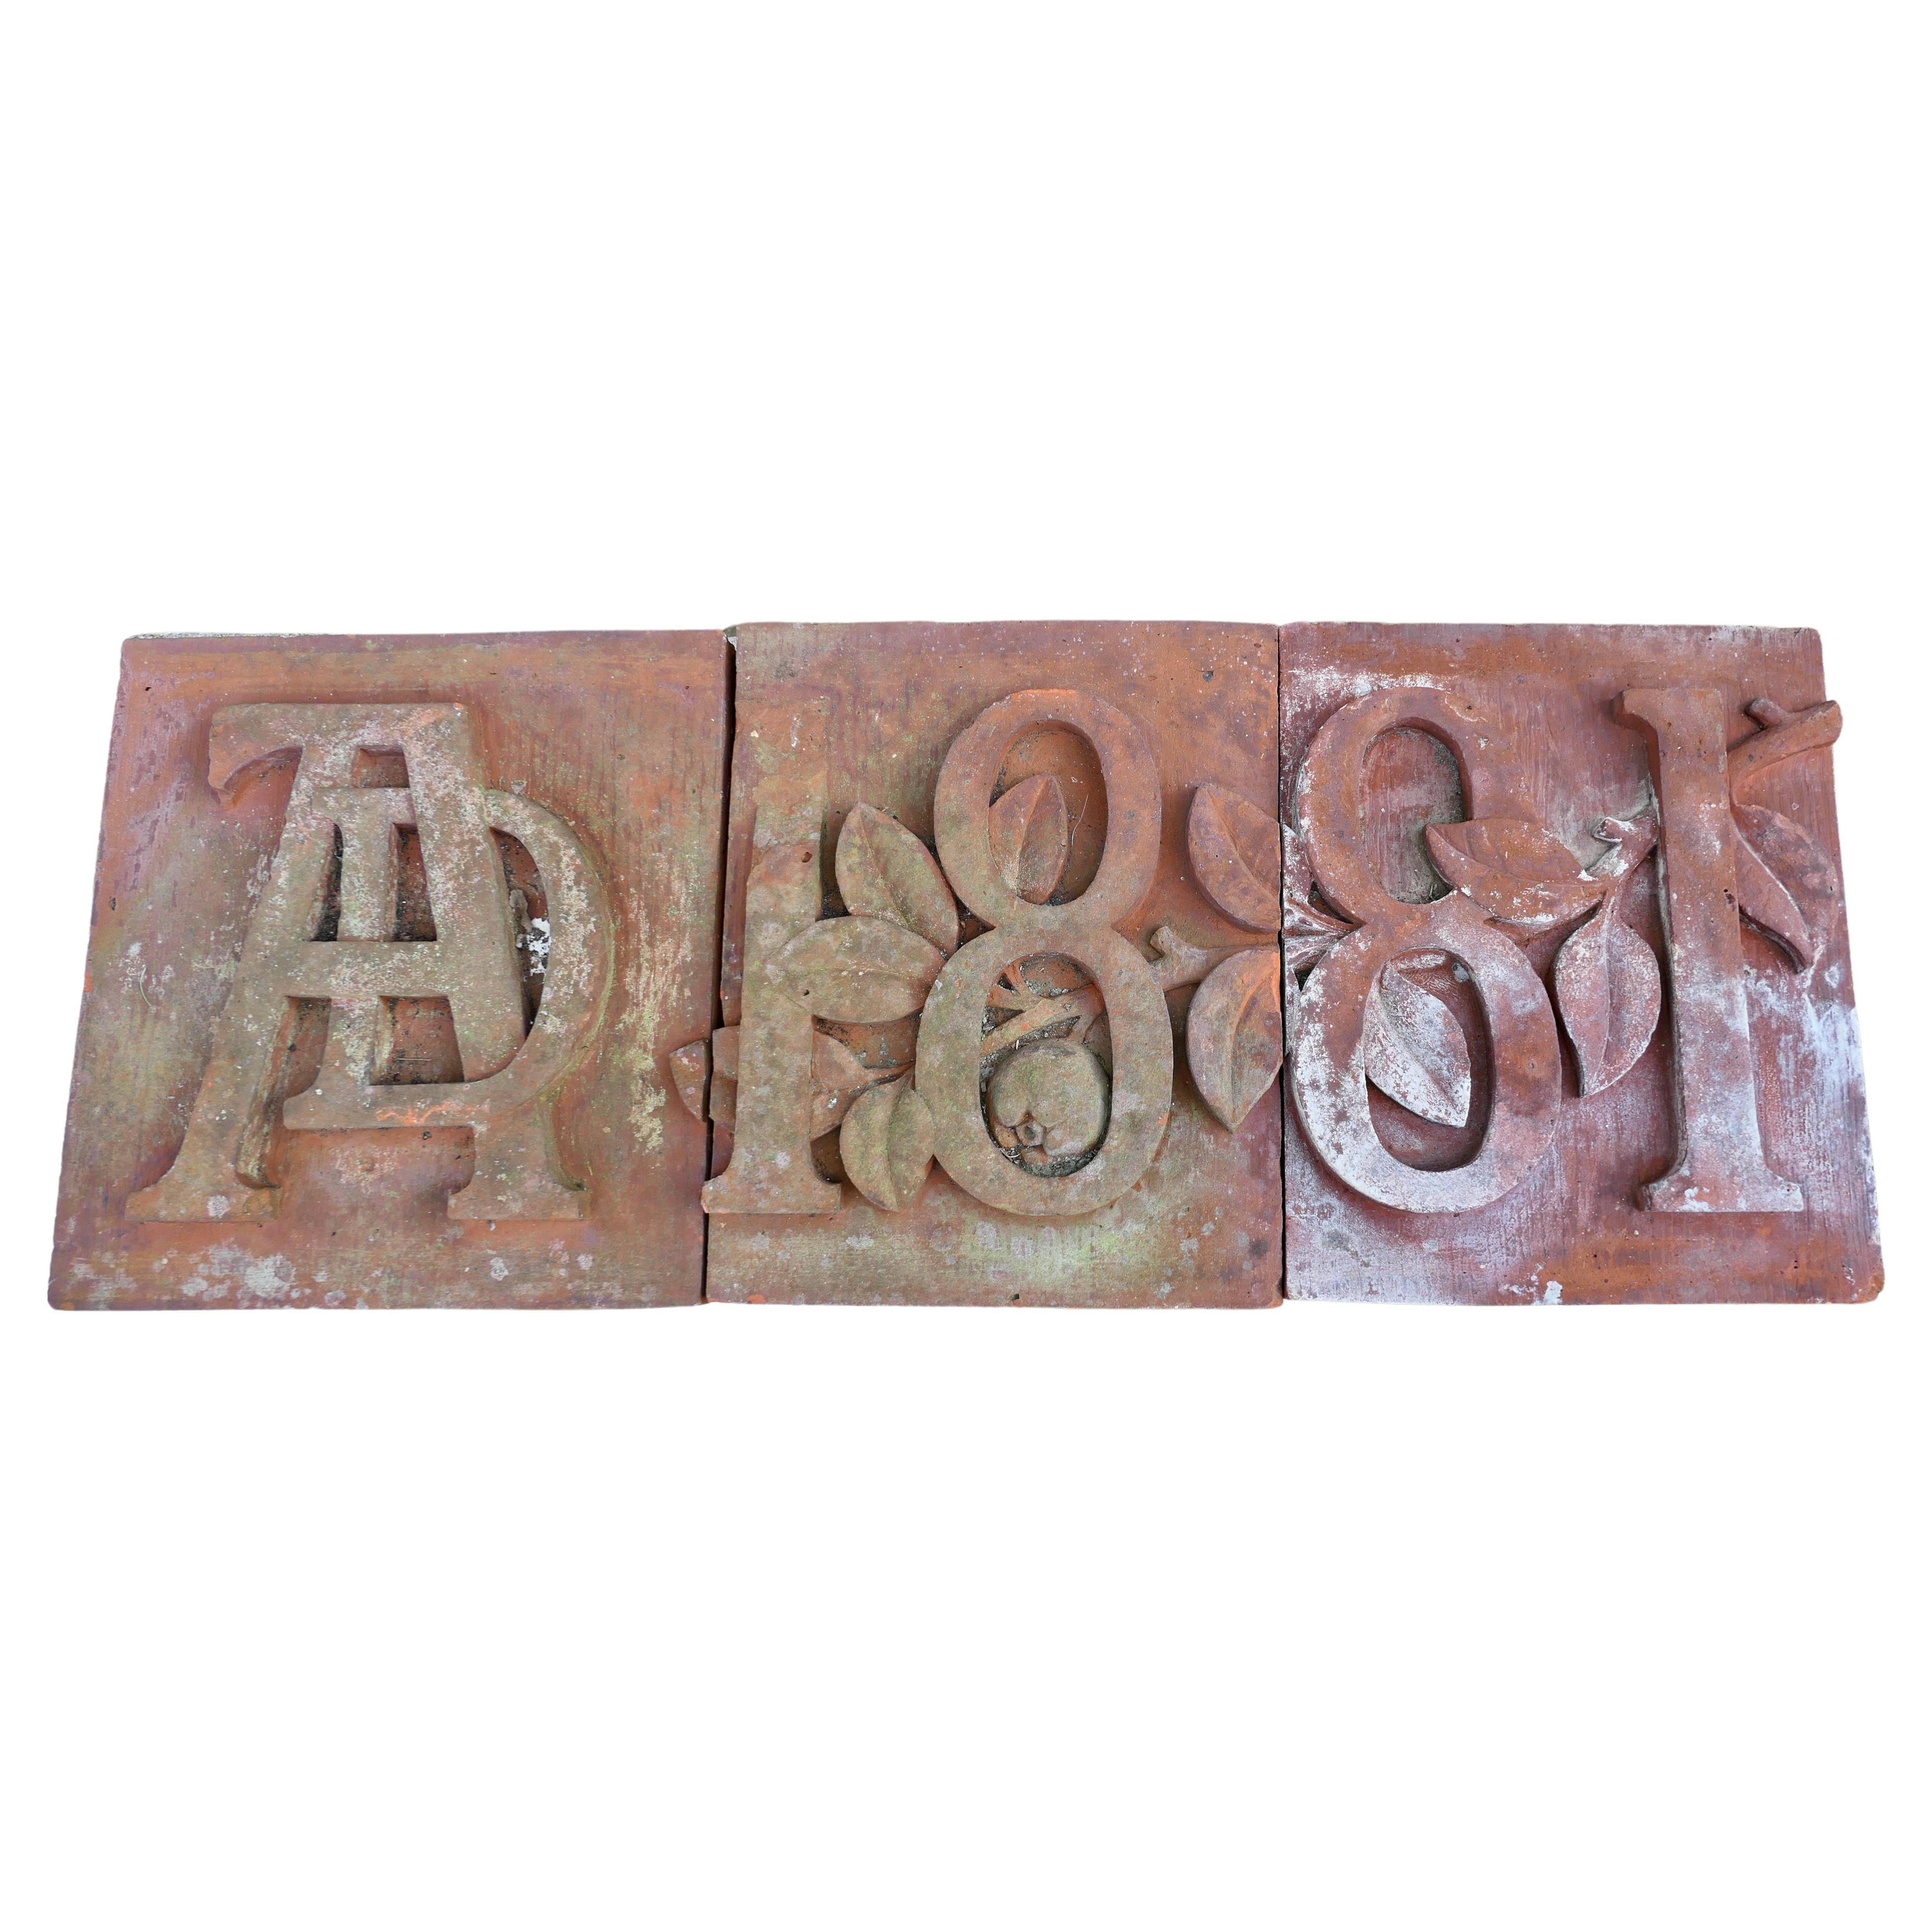 3 Hand Made Terracotta Foundation Stones AD1881